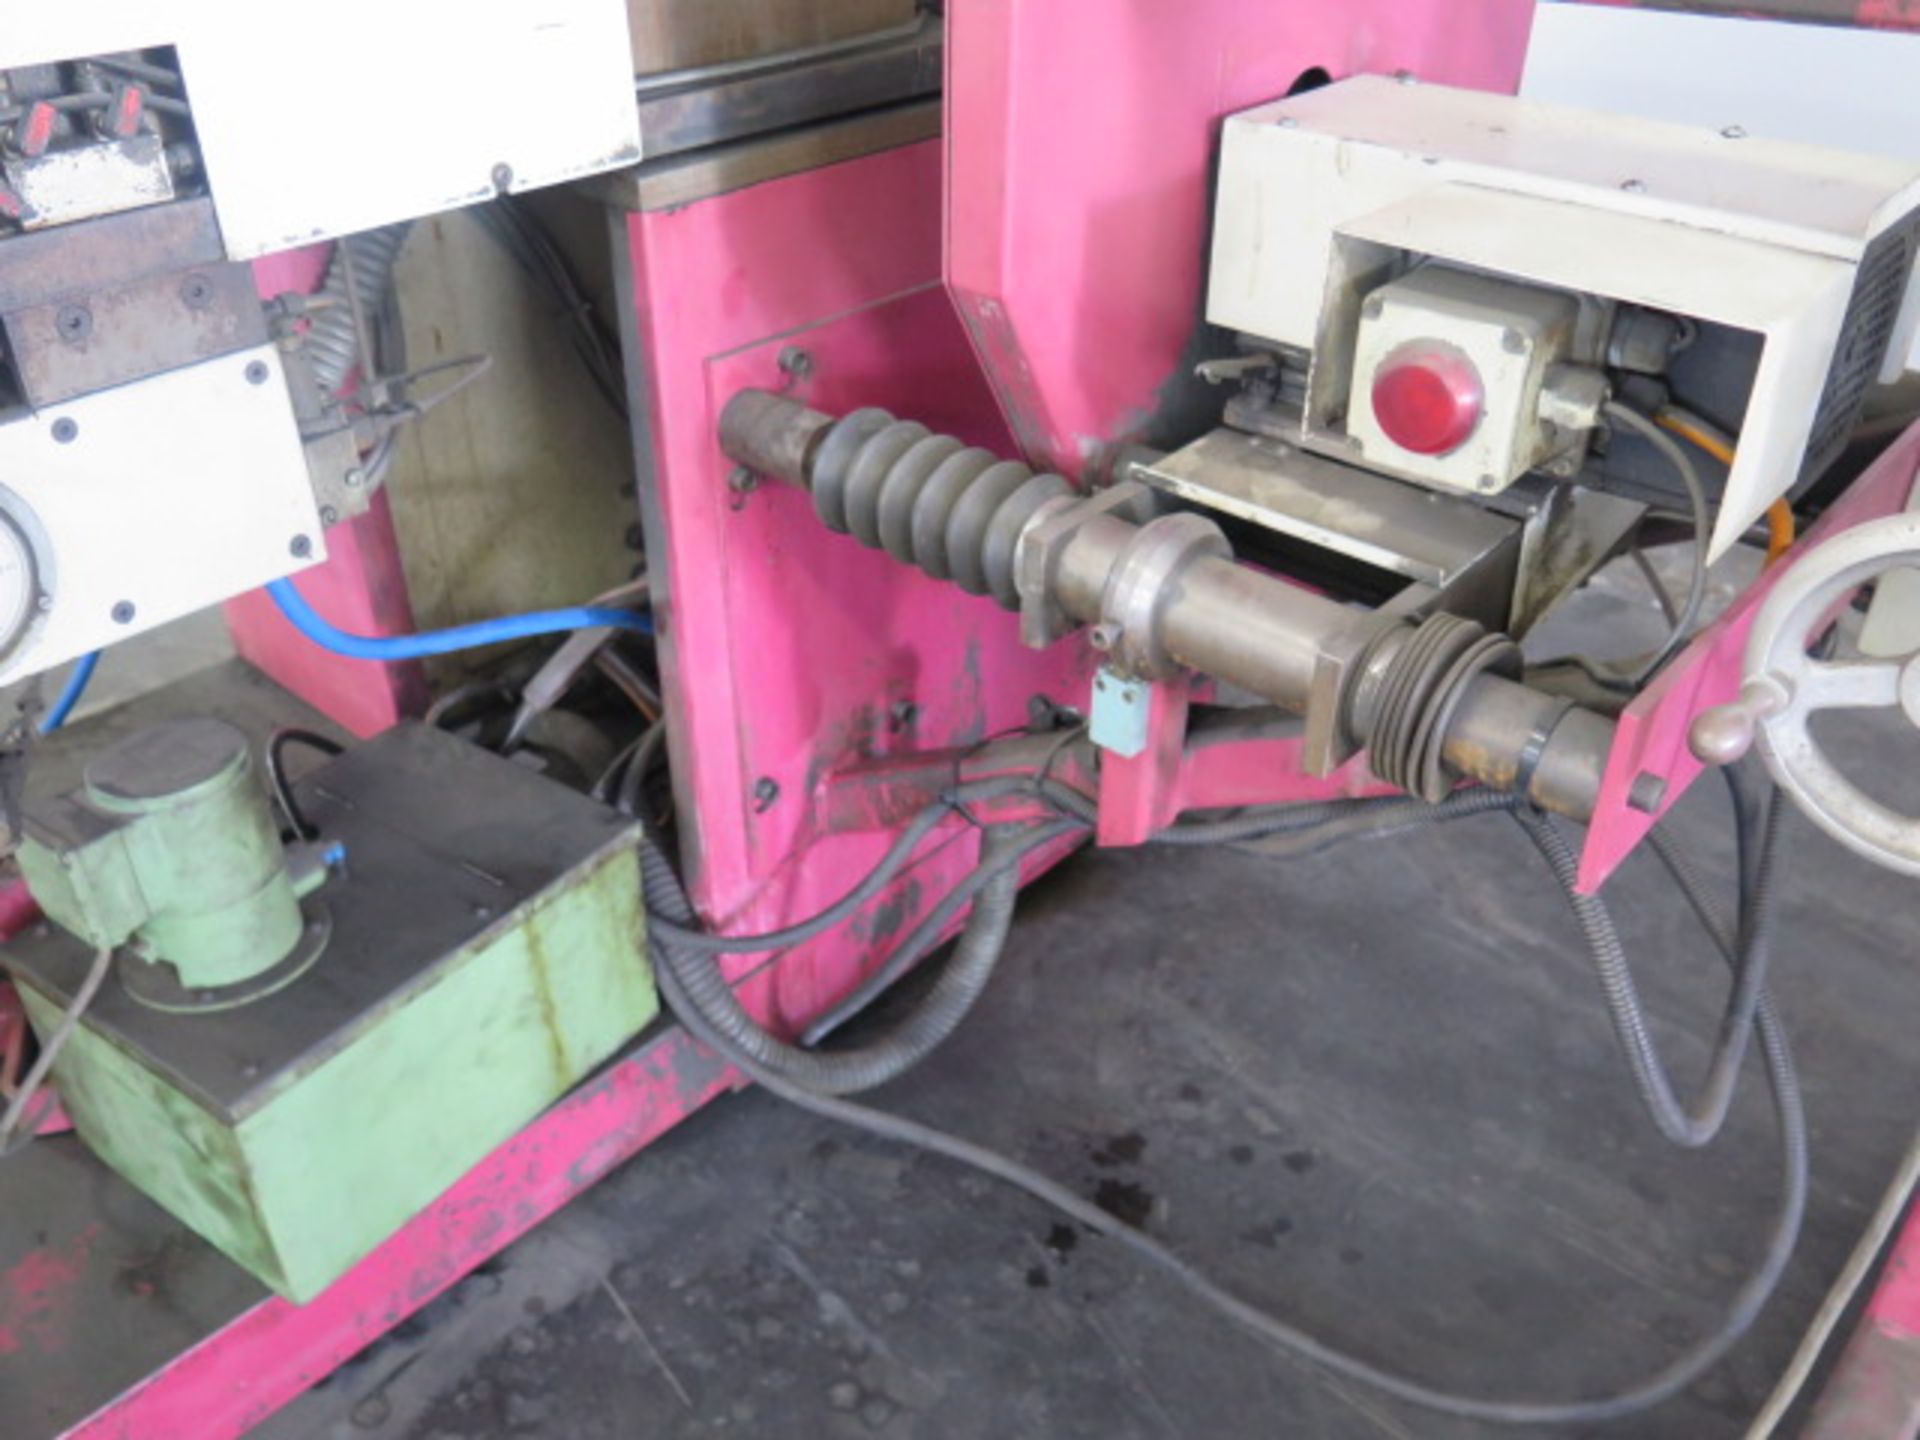 Tormec TUBO MOBIL 4”-54” Spiral Lockseam Duct Tube Forming Machine w/ 4” to 54” Duct Cap, SOLD AS IS - Image 20 of 23